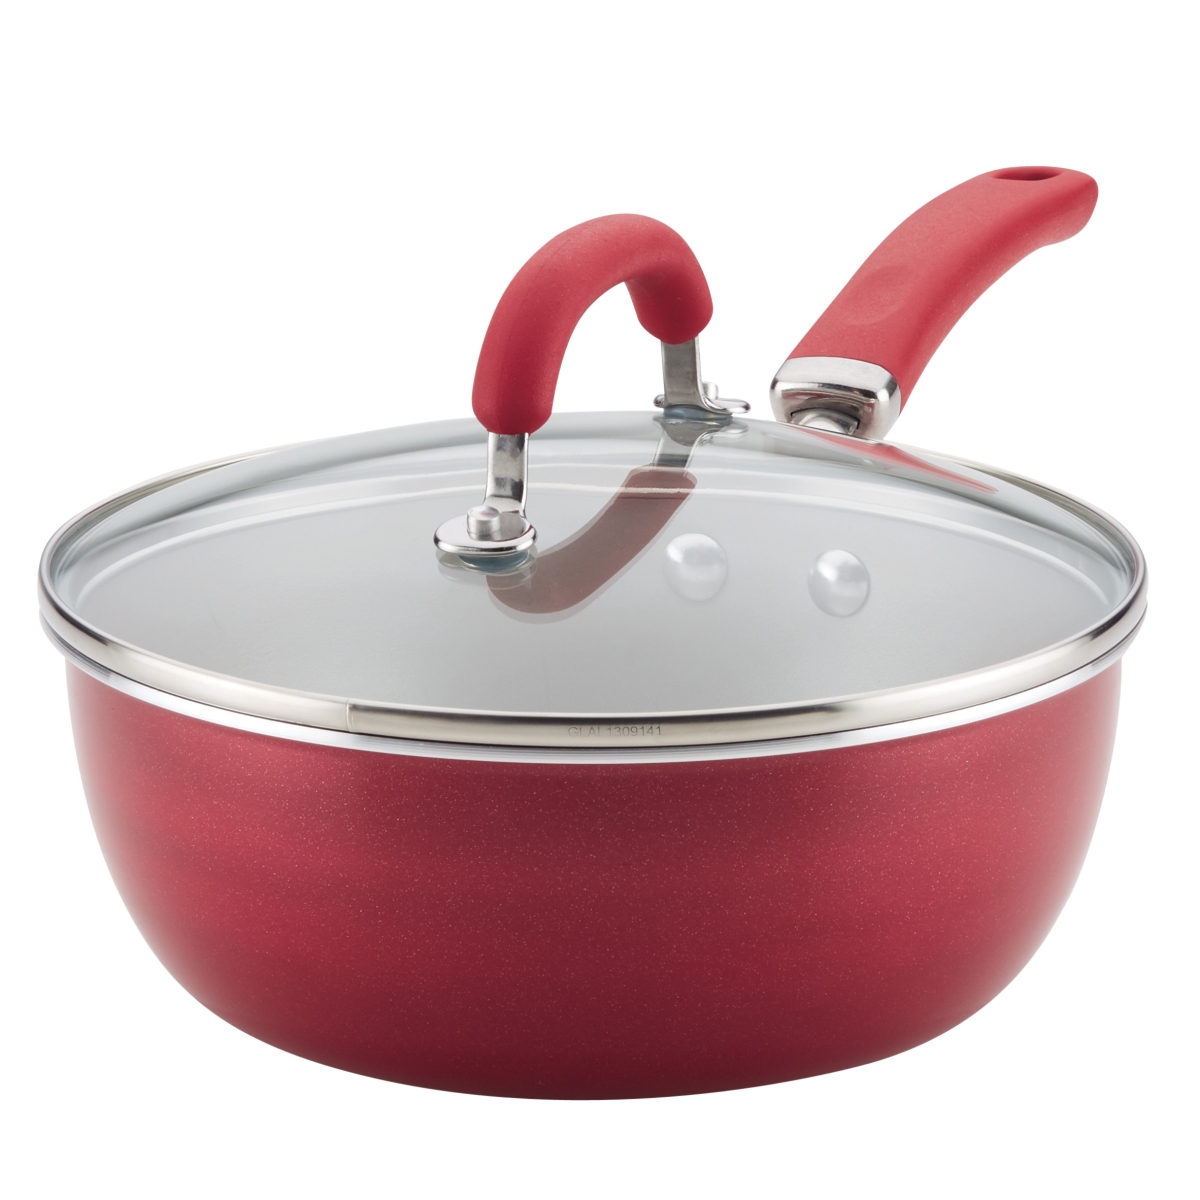 Picture of Rachael Ray 12159 3 qt. Create Delicious Aluminum Nonstick Everything Pan - Red Shimmer